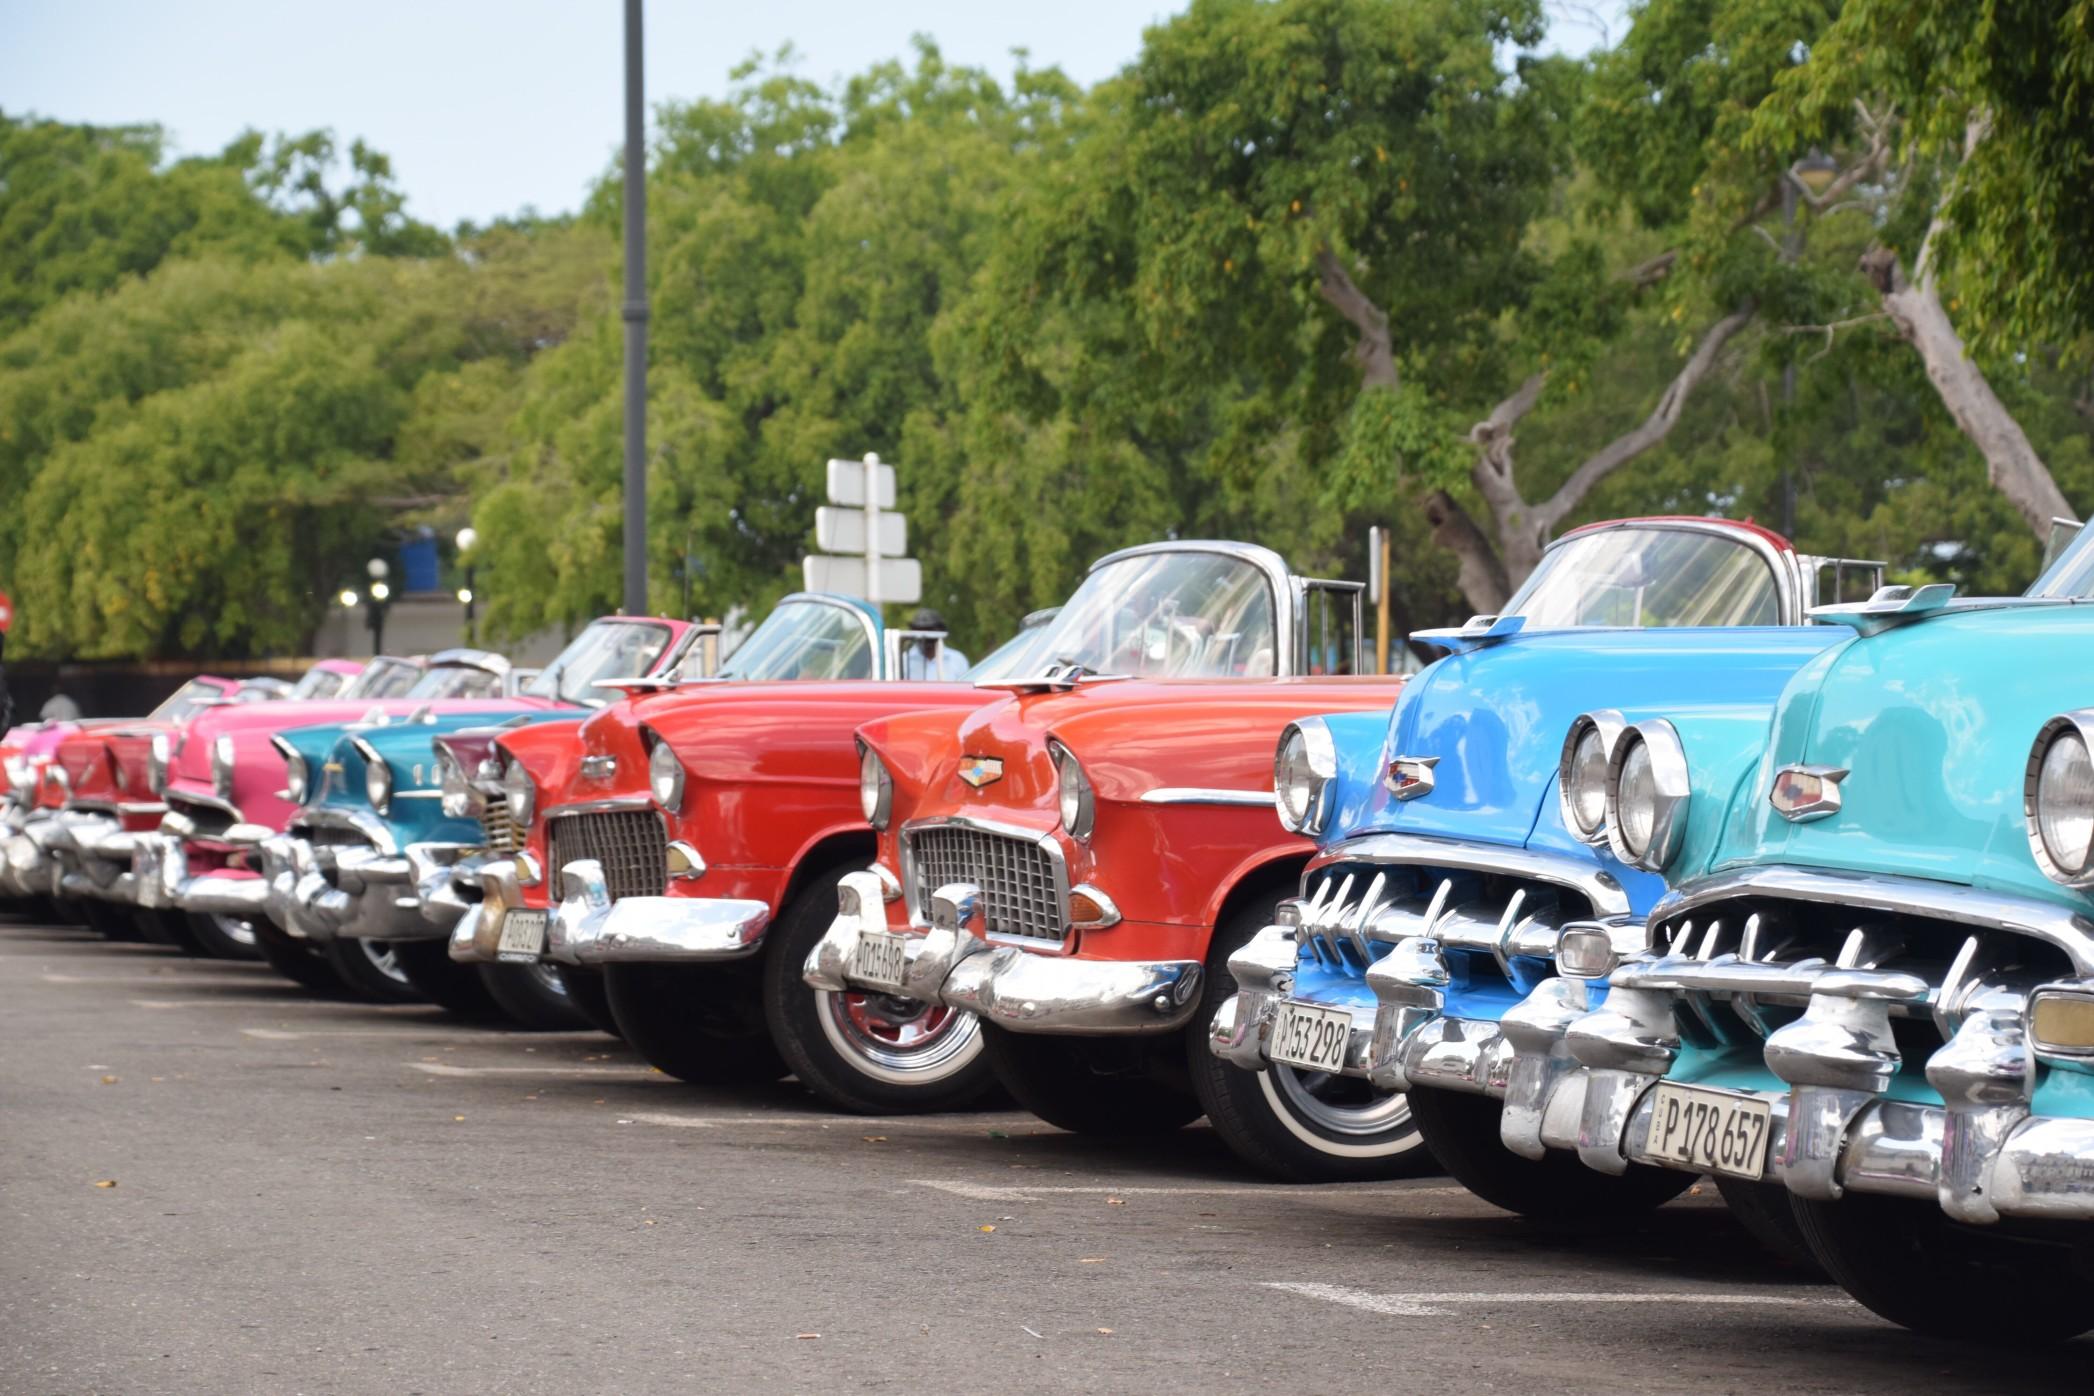 Colorful classic cars linedup in a parking lot.